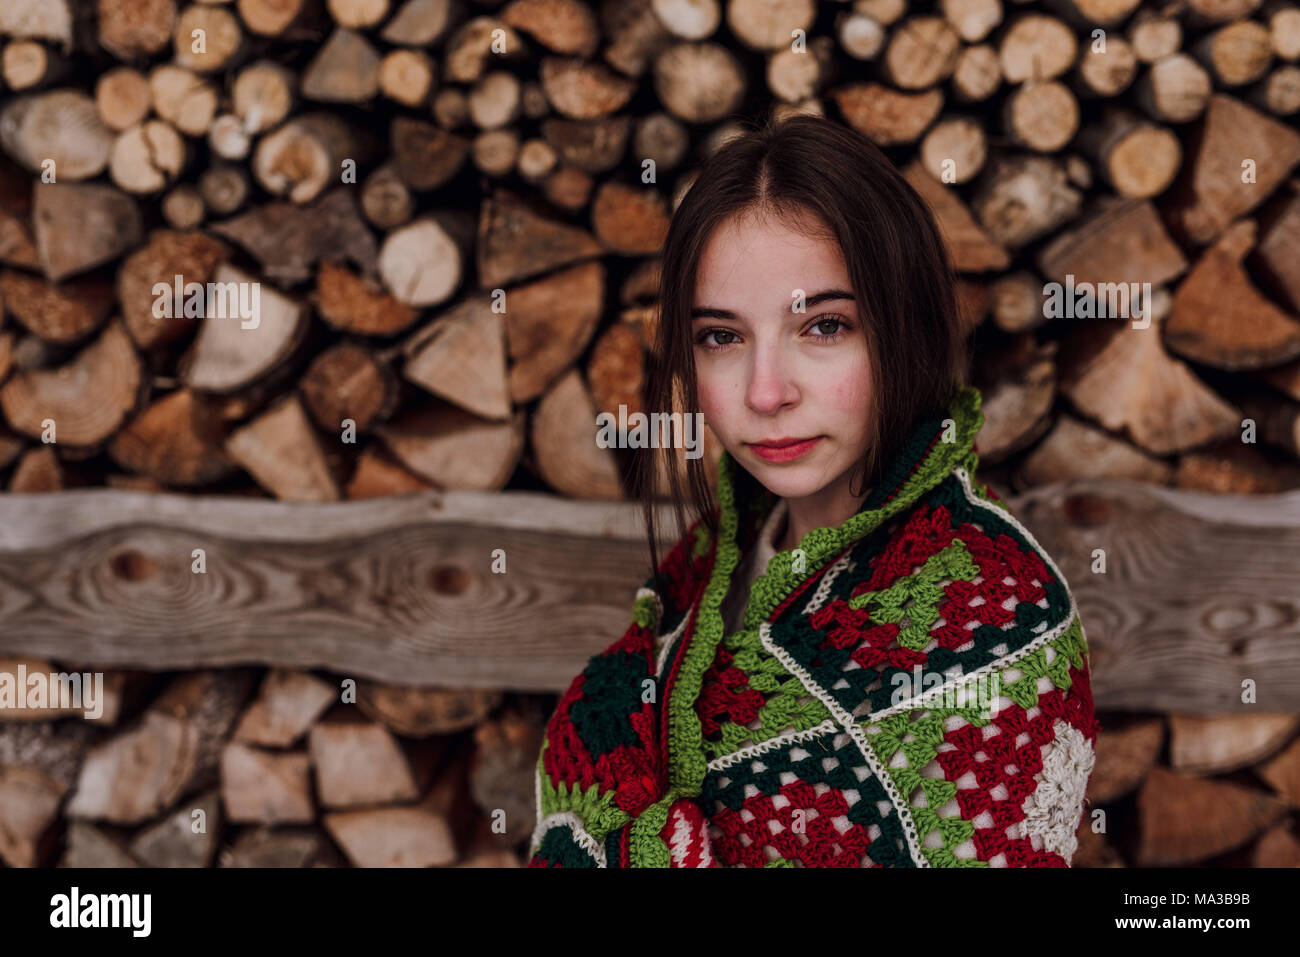 young woman wrapped in a blanket in front of a woodpile,portrait Stock Photo